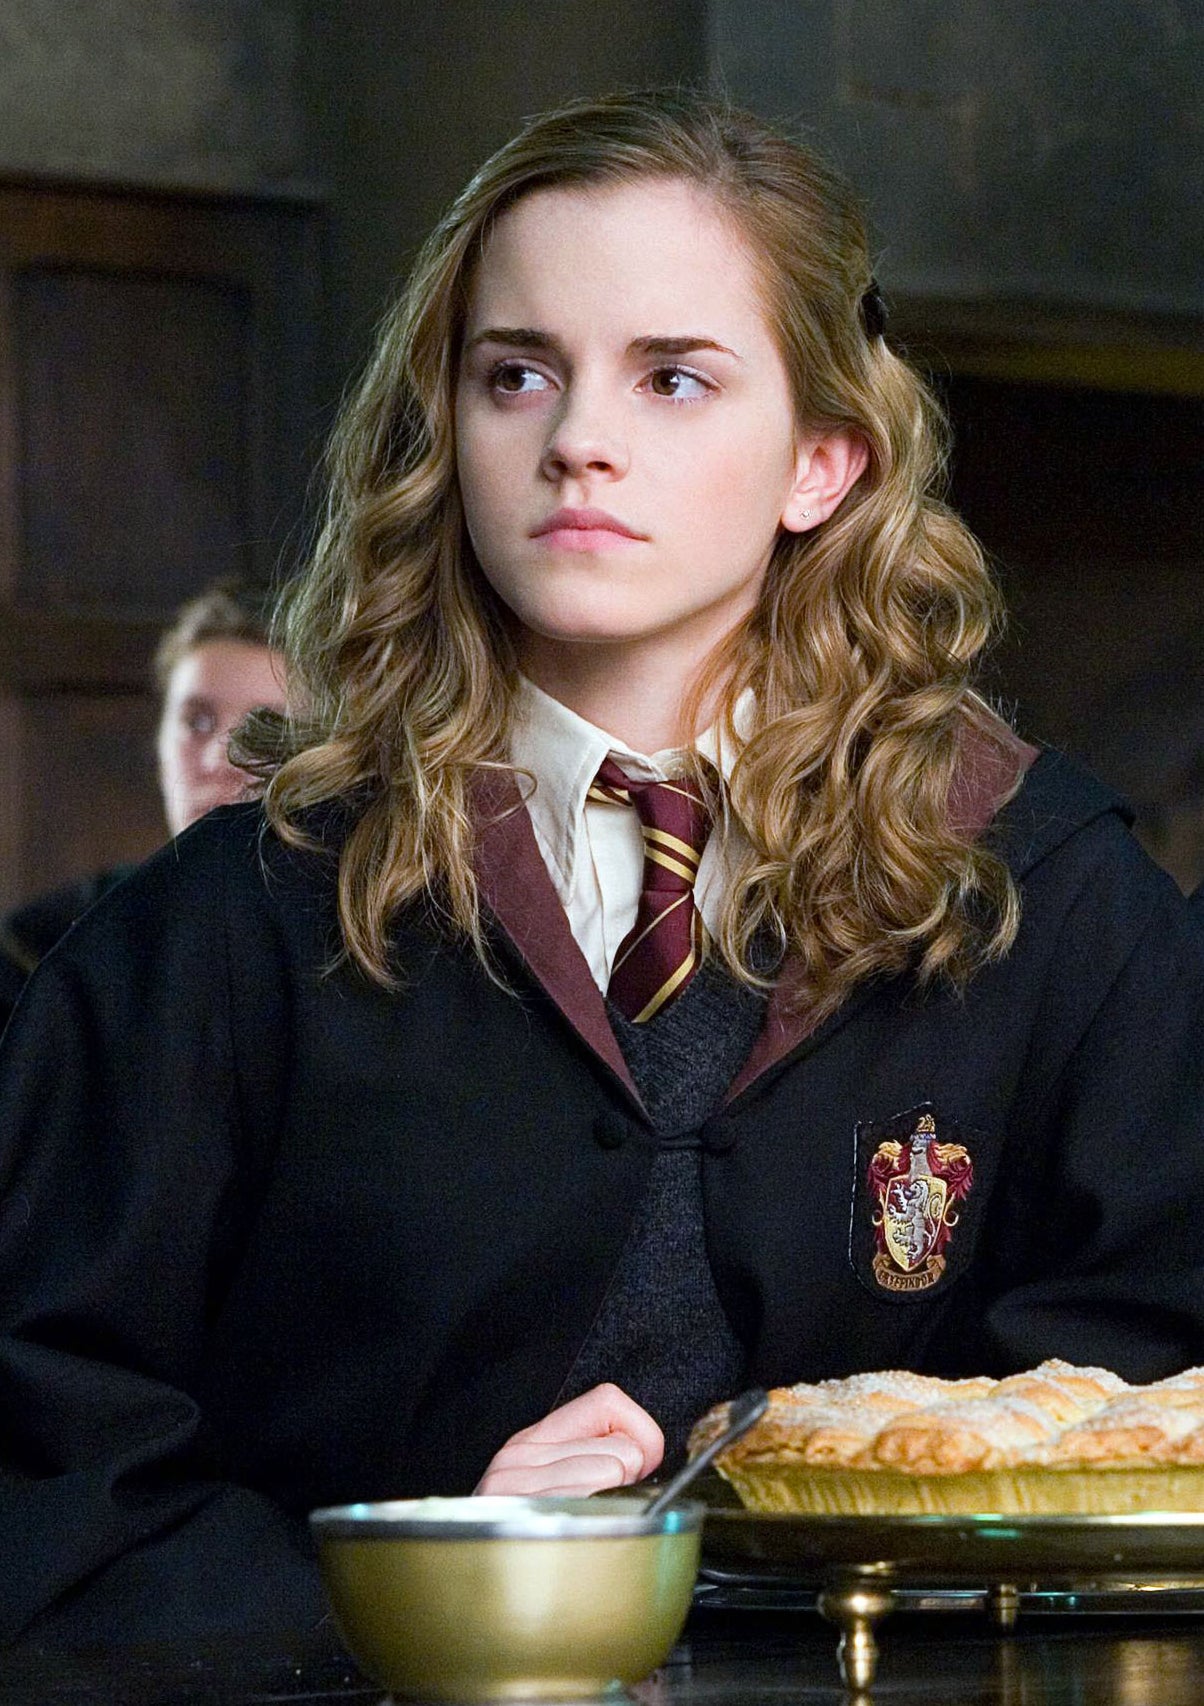 Emma Watson as Hermione Granger sits at a table in the Great Hall of Hogwarts